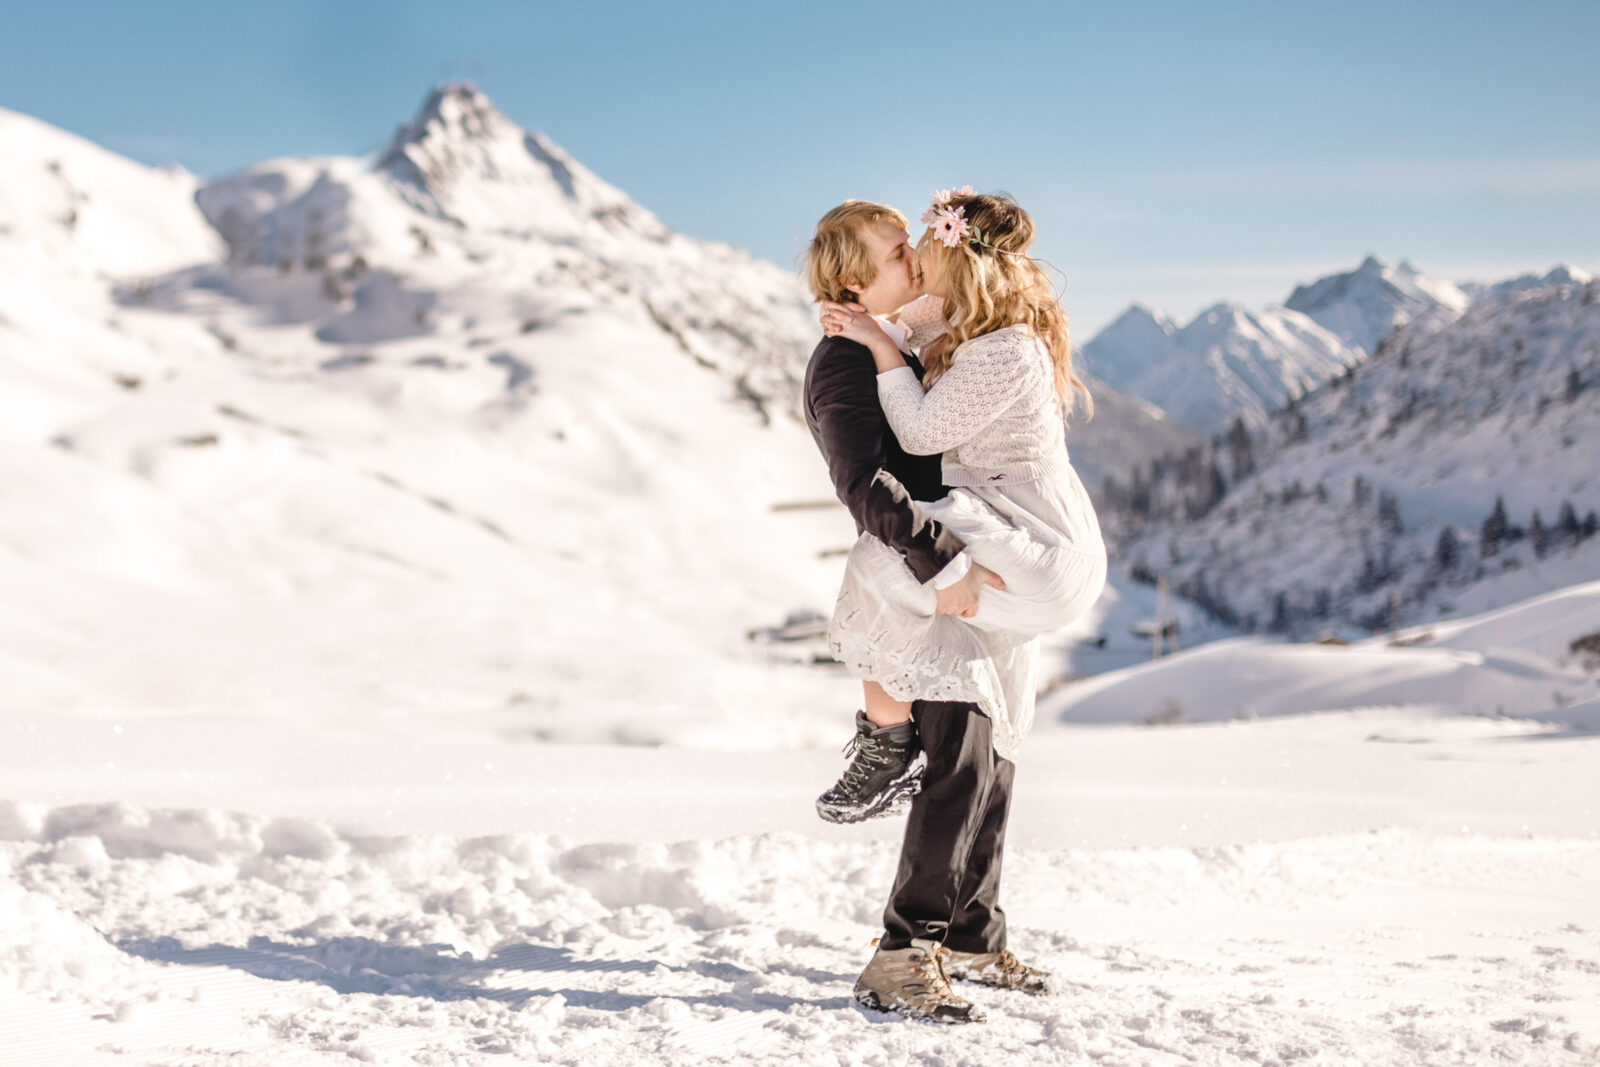 Winter Elopement in the snowy mountains in austria europe